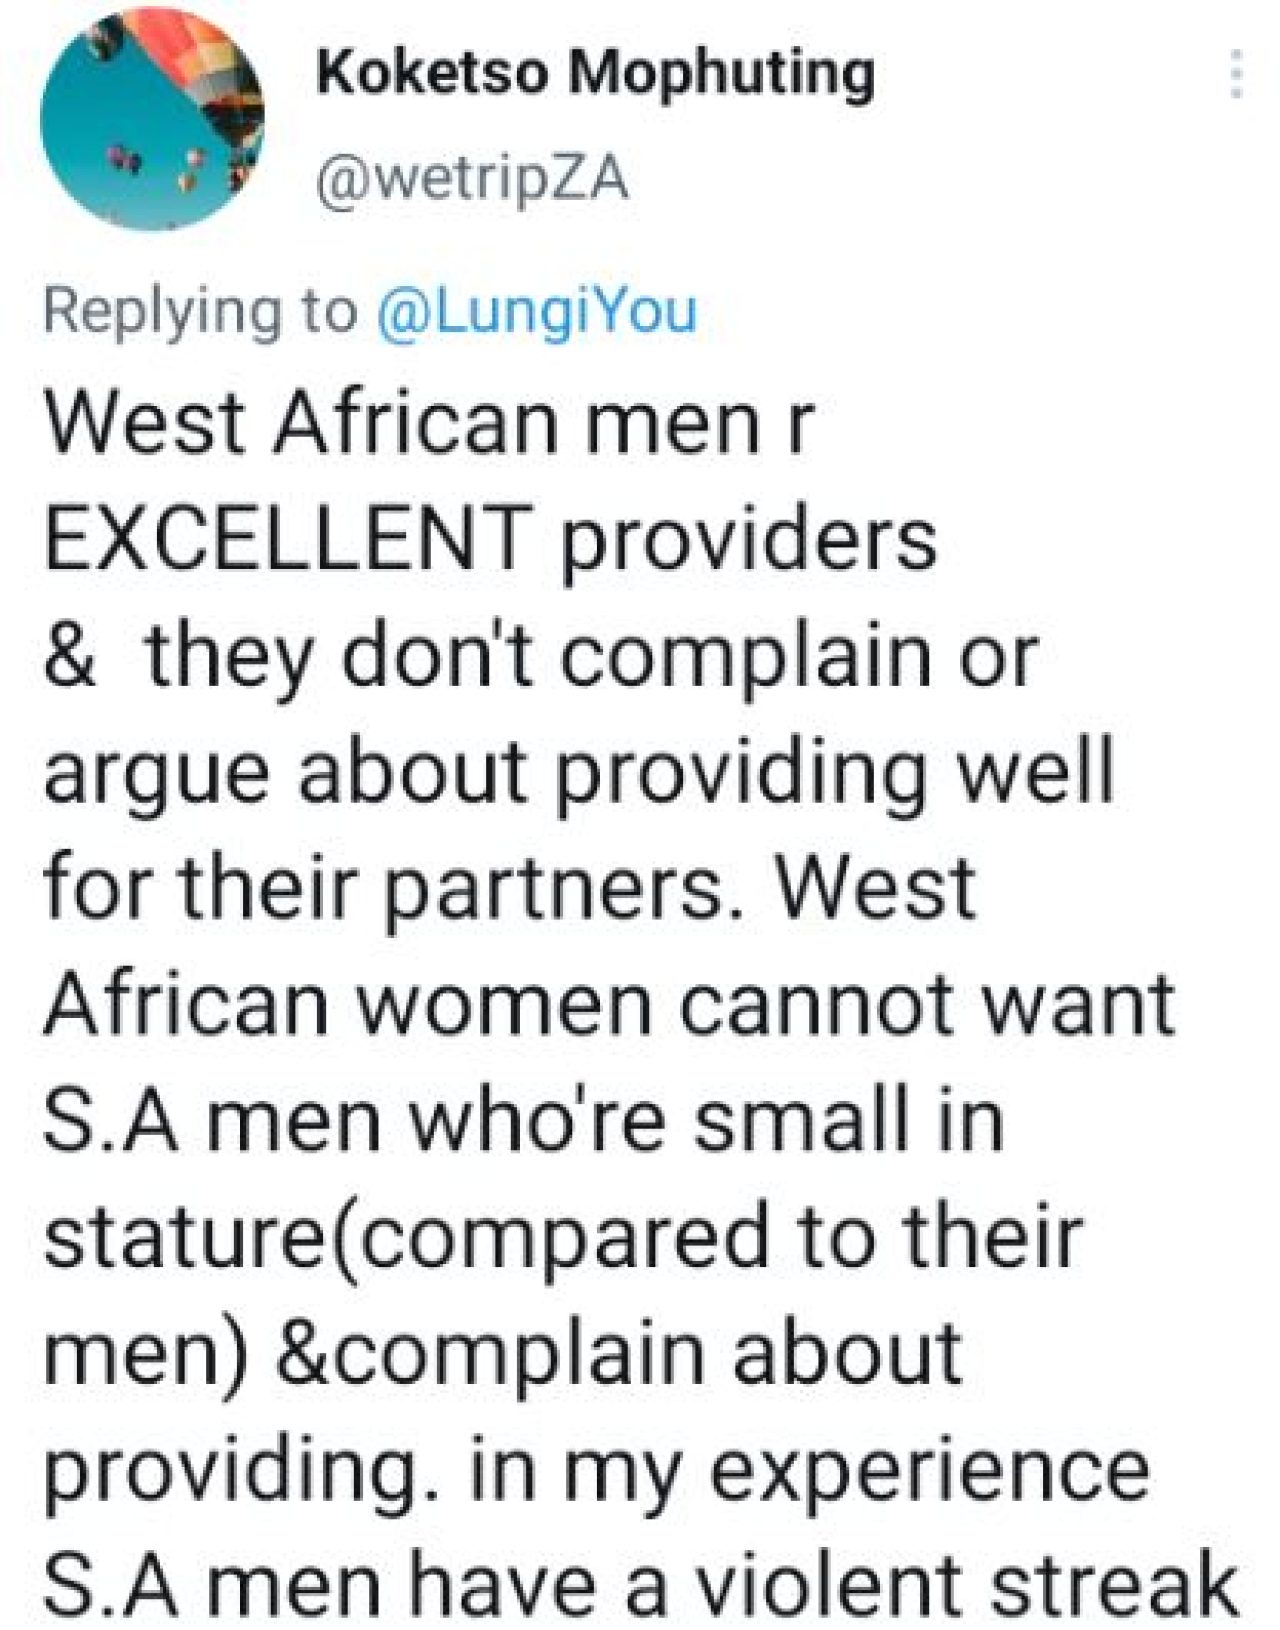 "I've never heard any Nigerian lady say, “I want an SA man”, it's always our girls throwing themselves at Nigerian men. AdvertAfrica News on afronewswire.com: Amplifying Africa's Voice | afronewswire.com | Breaking News & Stories